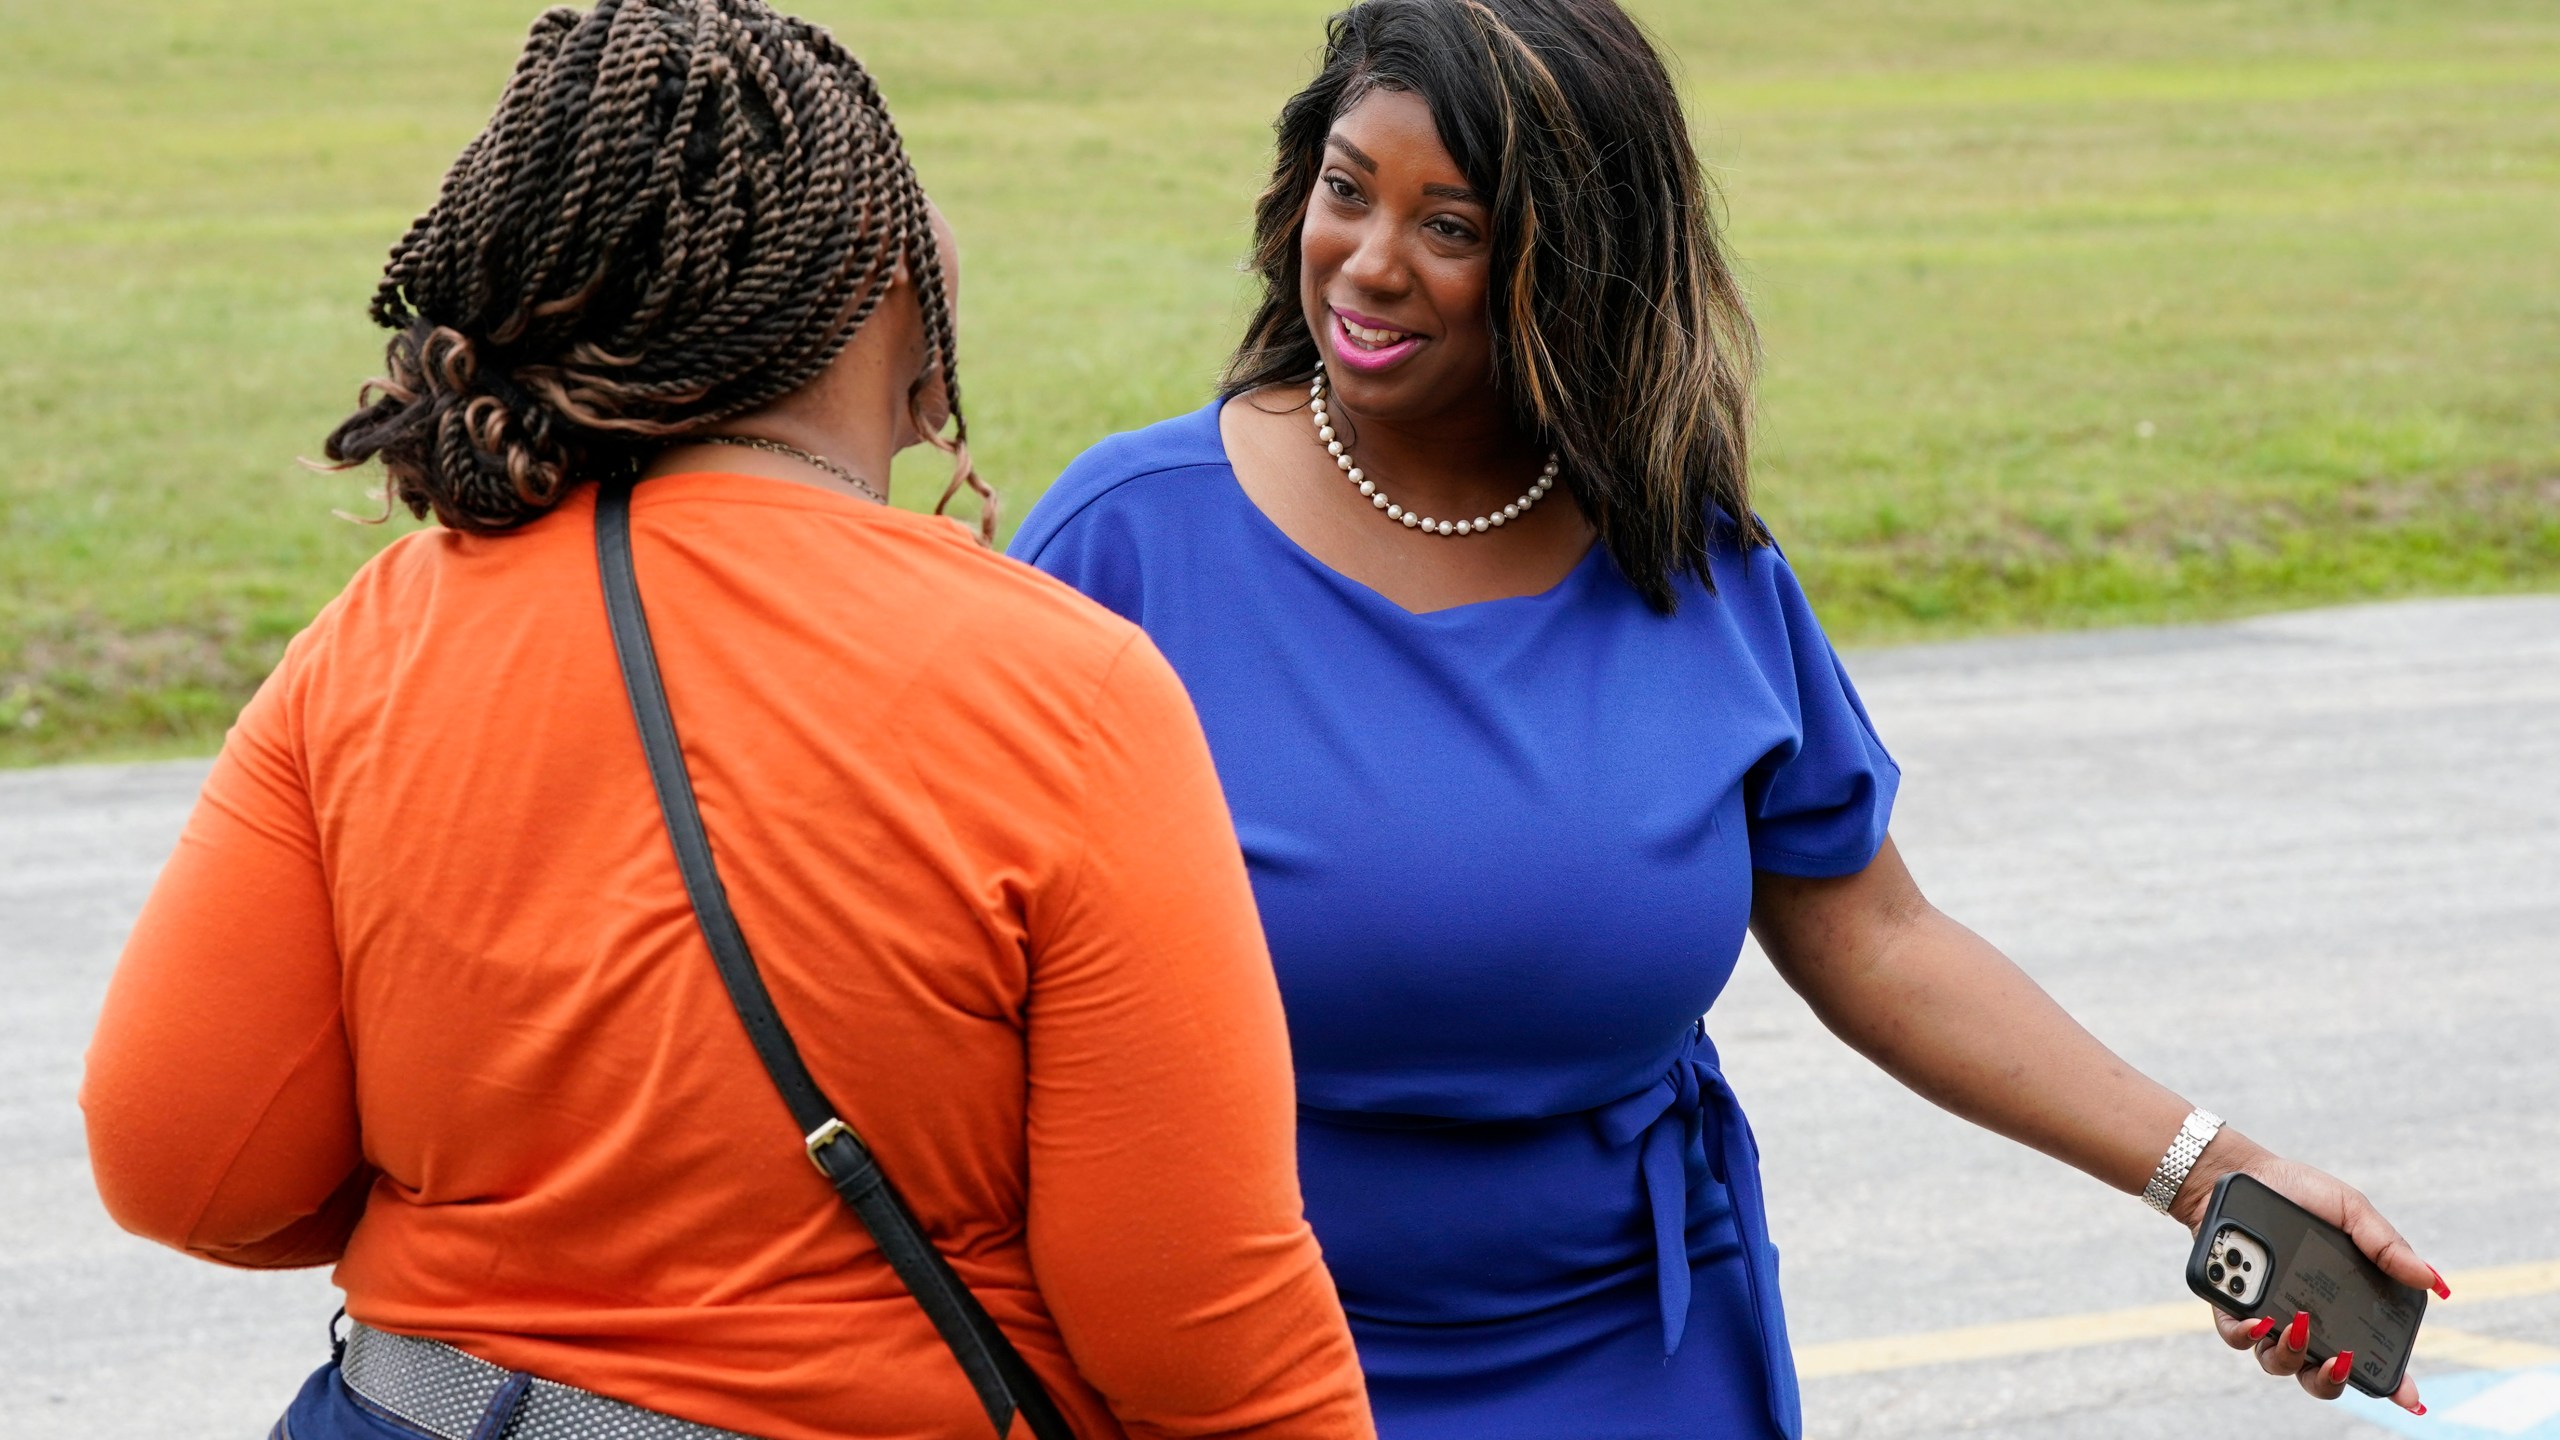 Former Virginia State Delegate Lashrecse Aird, right, talks with a voter as she visits a polling precinct Tuesday, June 20, 2023, in Surry, Va. Aird is running against Virginia State Sen. Joe Morrissey in a Democratic primary for a newly redrawn Senate district. (AP Photo/Steve Helber)